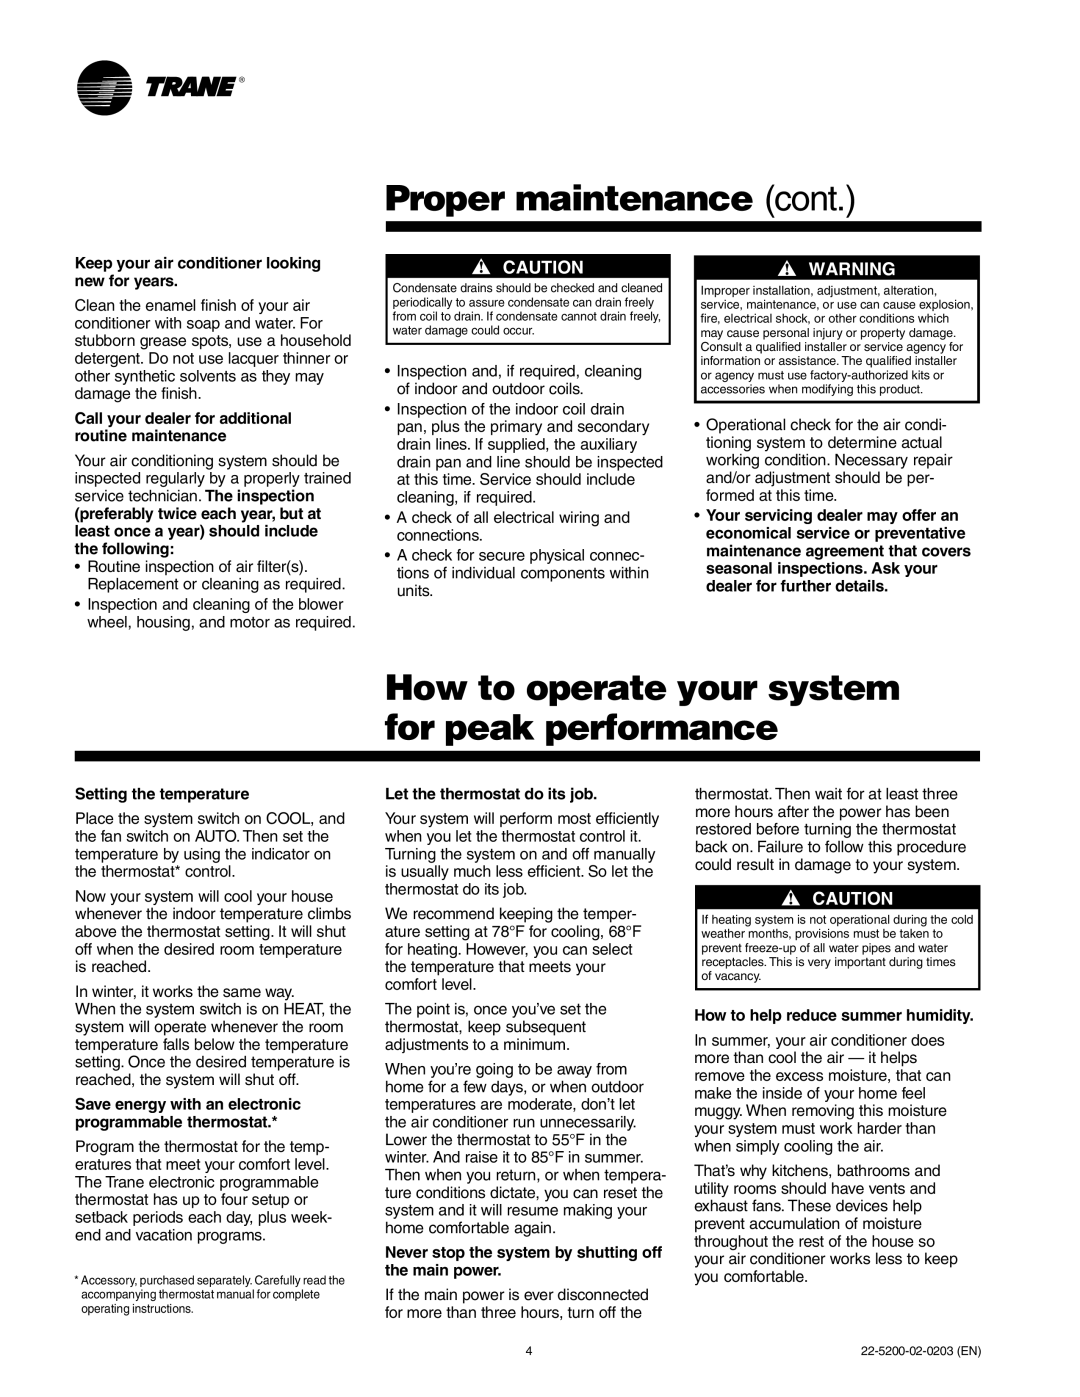 Trane XE1100, XE1200, XE1000 manual Proper maintenance cont, How to operate your system for peak performance 